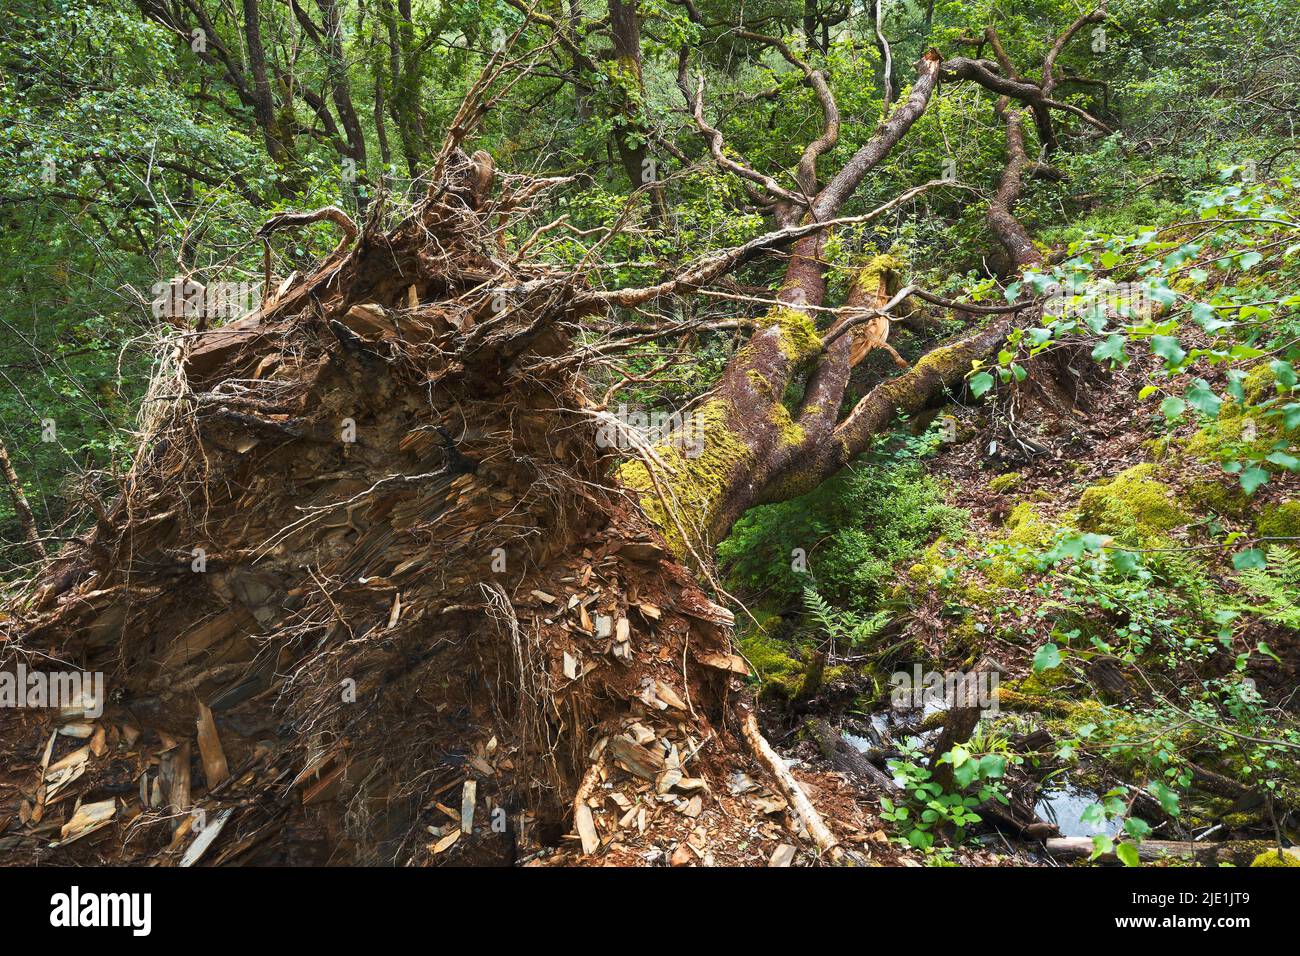 A mature oak tree fallen in woodland environment, with root plate attached and exposed. Stock Photo